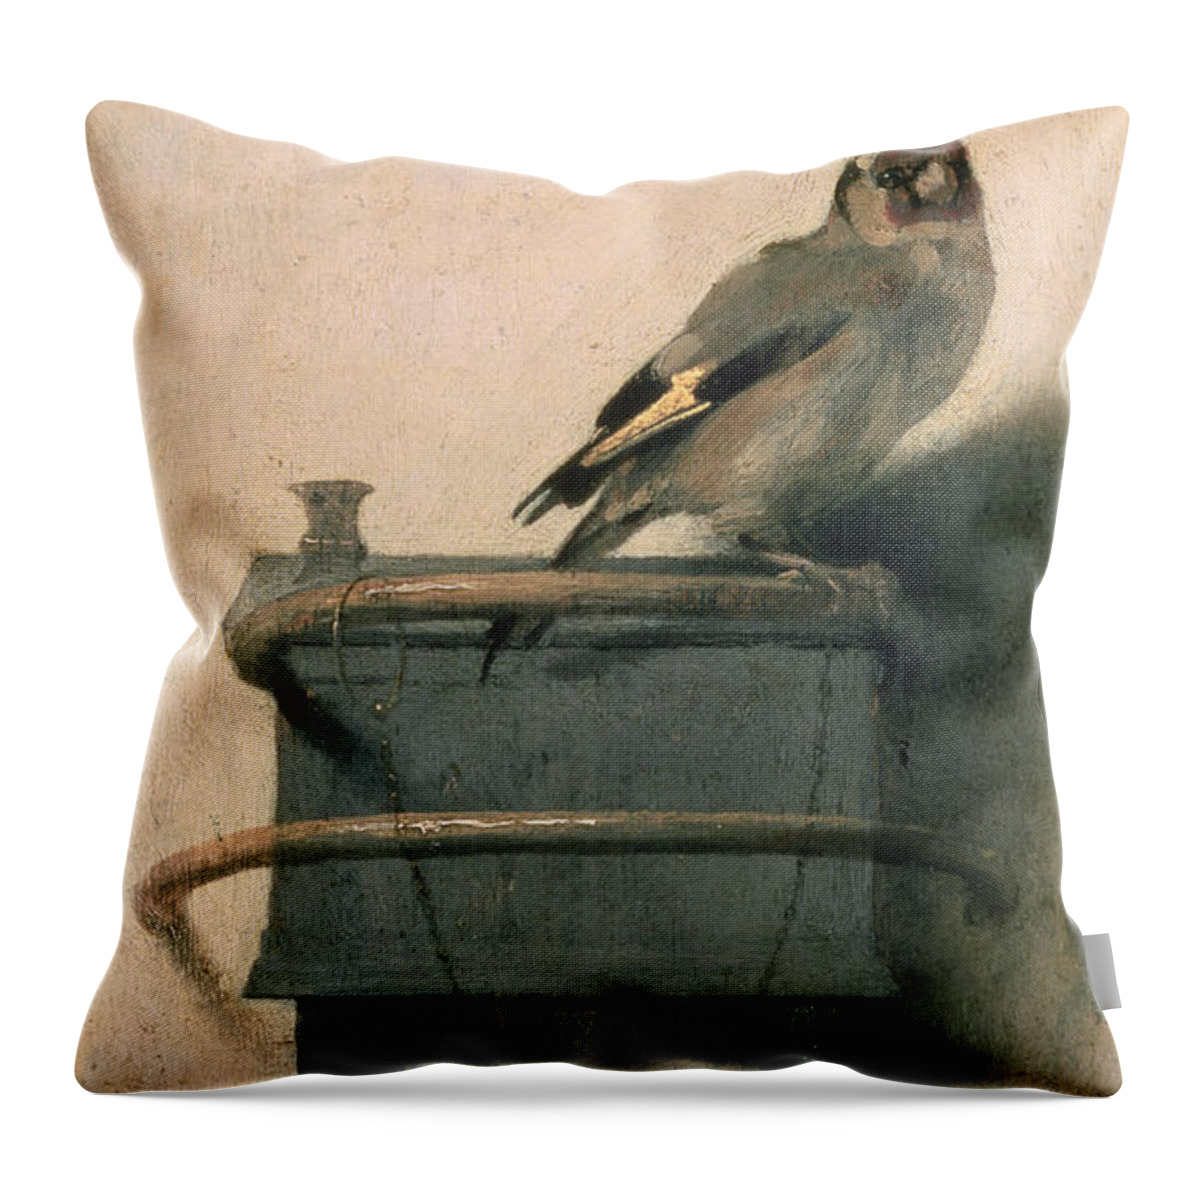 Bird Throw Pillow featuring the painting The Goldfinch by Carel Fabritius